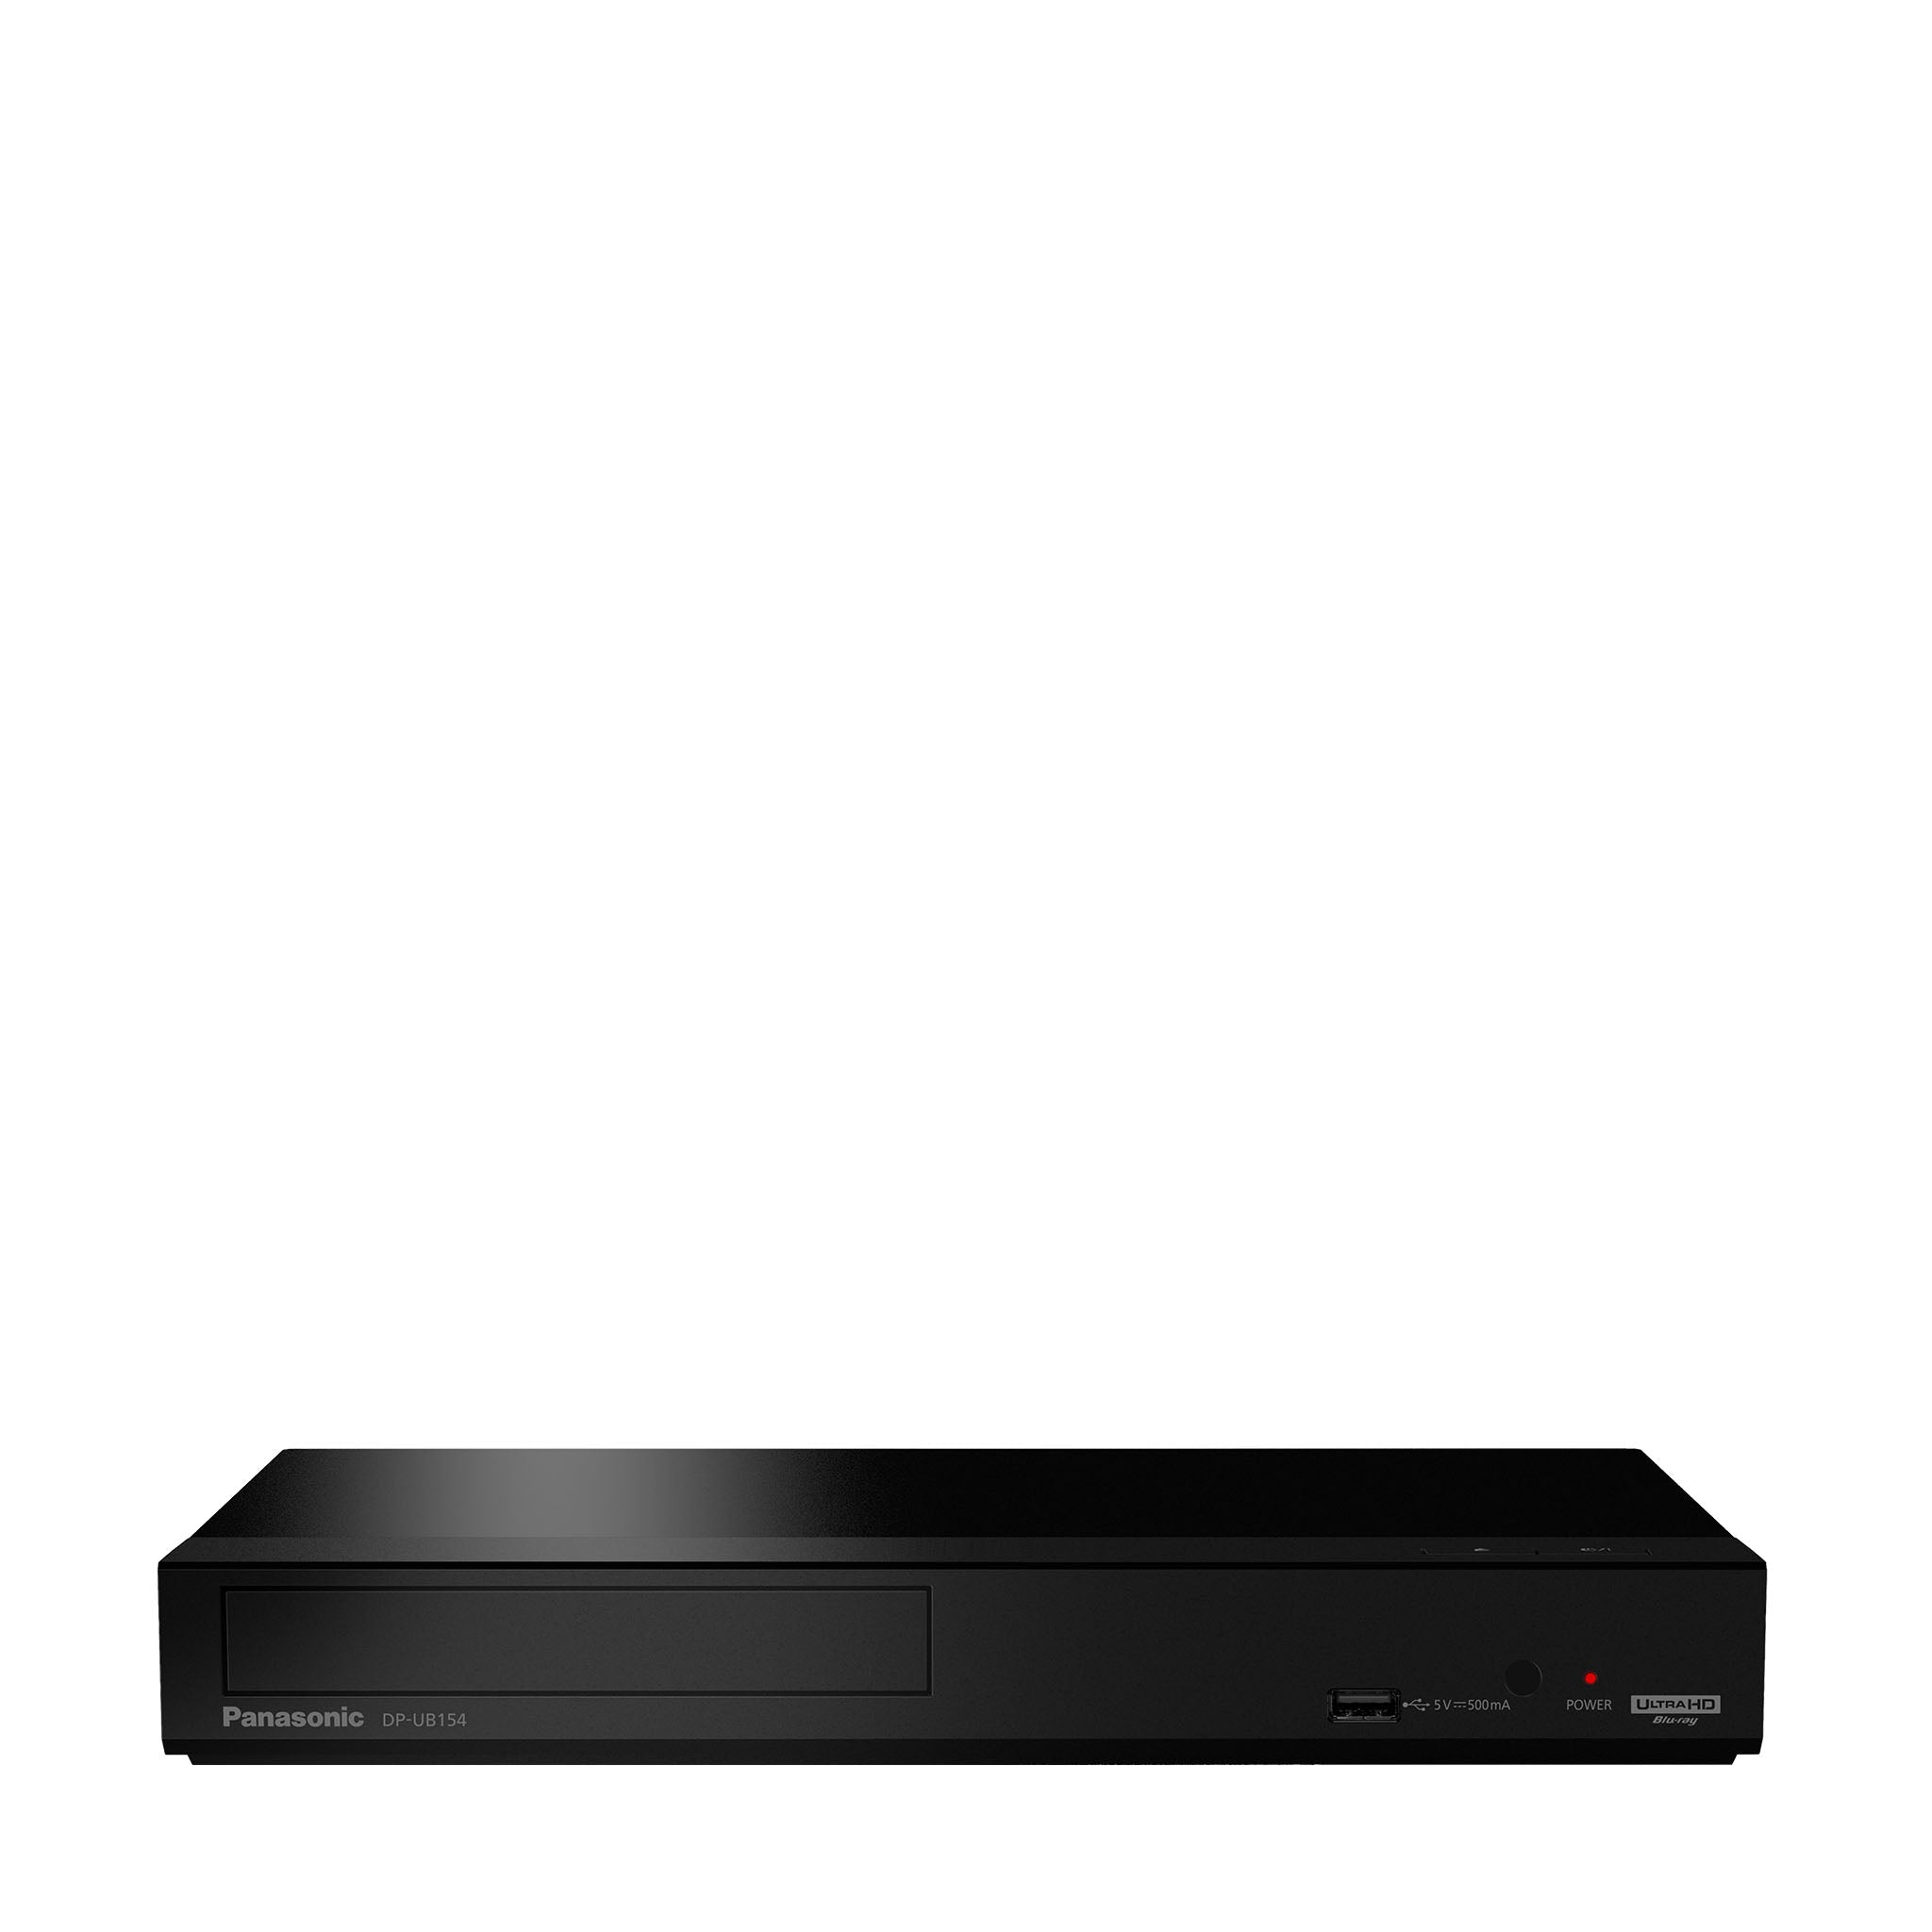 Panasonic 4K Streaming Blu-ray Player with Dobly Vision 7.1, Ultra HD  Premium Video Playback and Hi-Res Audio - DP-UB820P-K